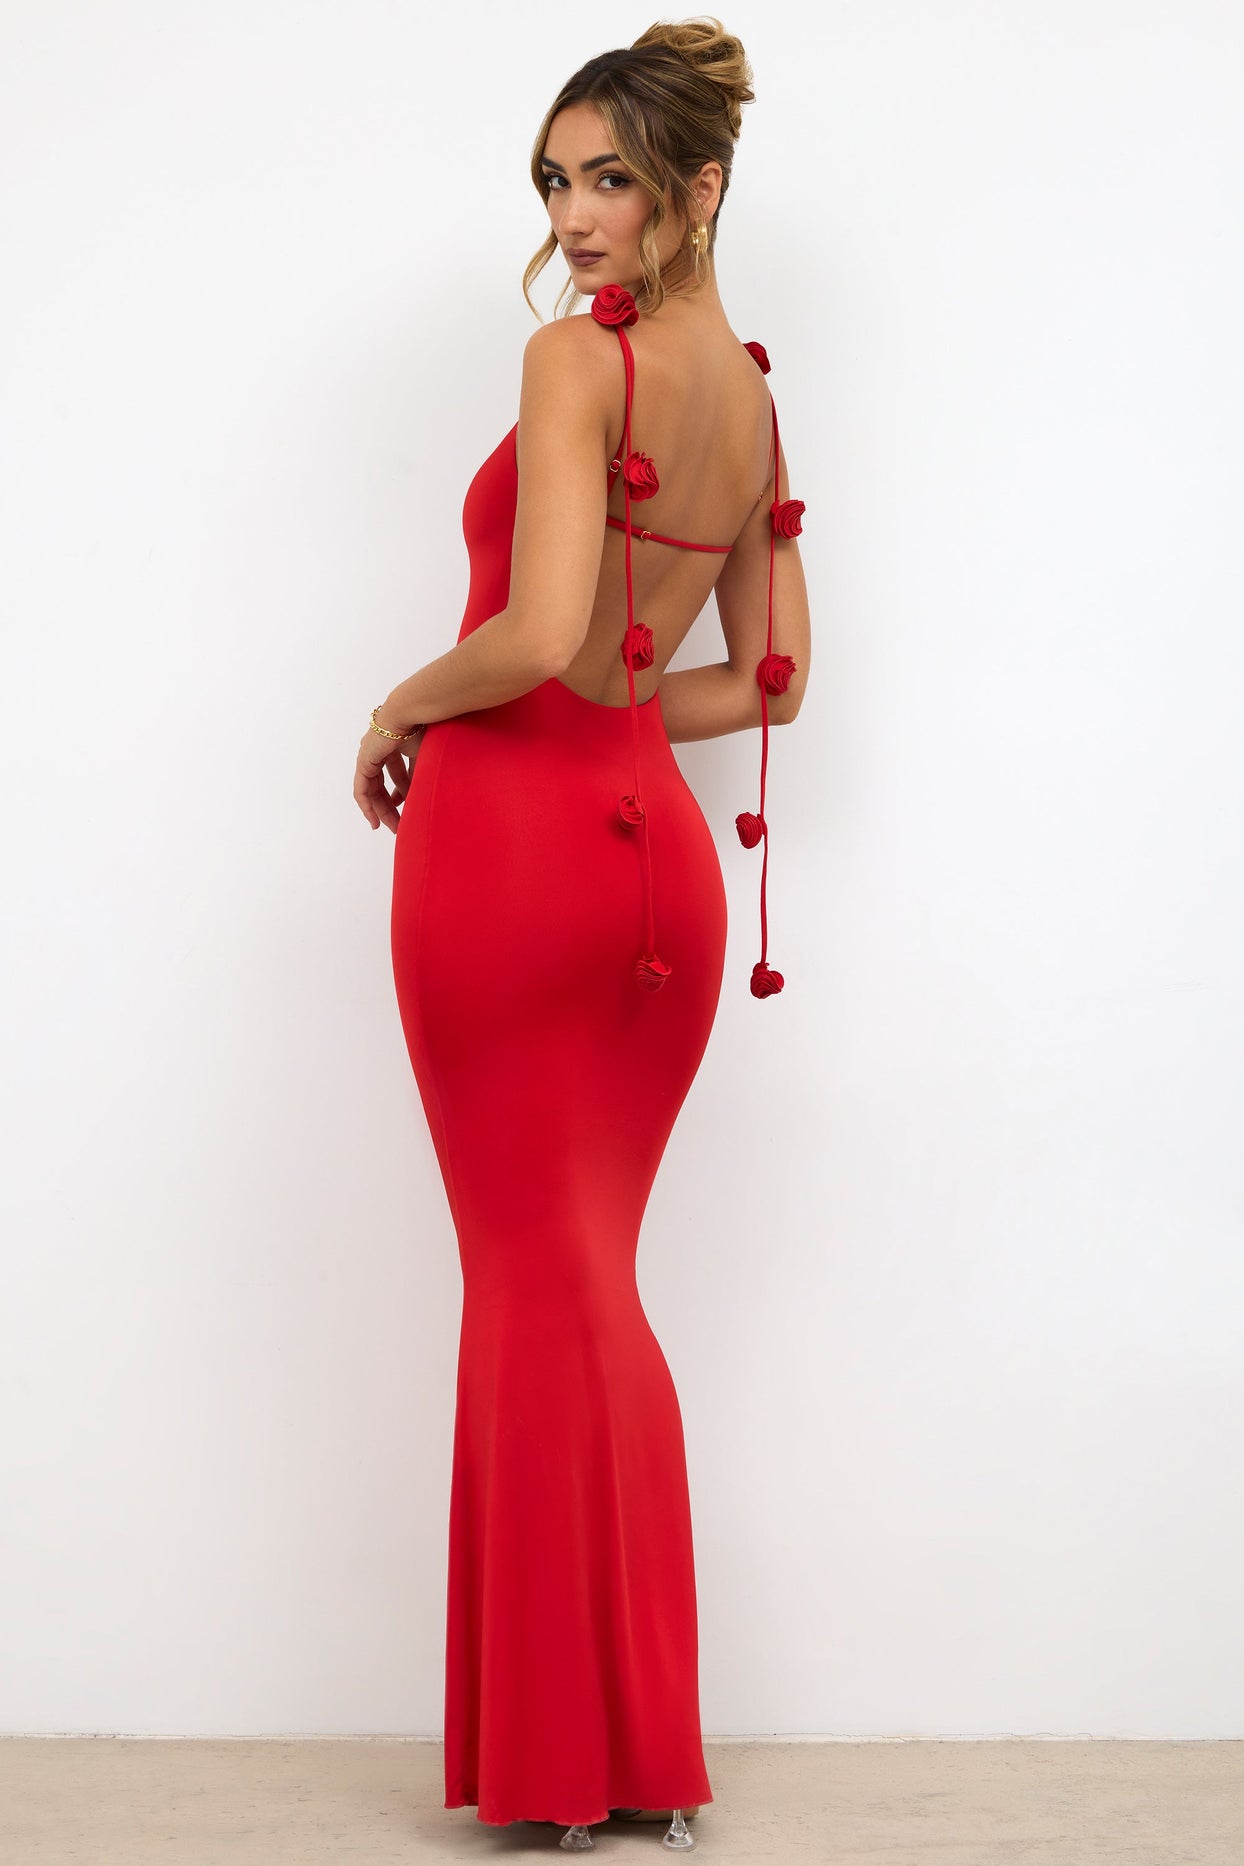 Premium Photo  Fashionable Femme Fatale in a Slinky Gown